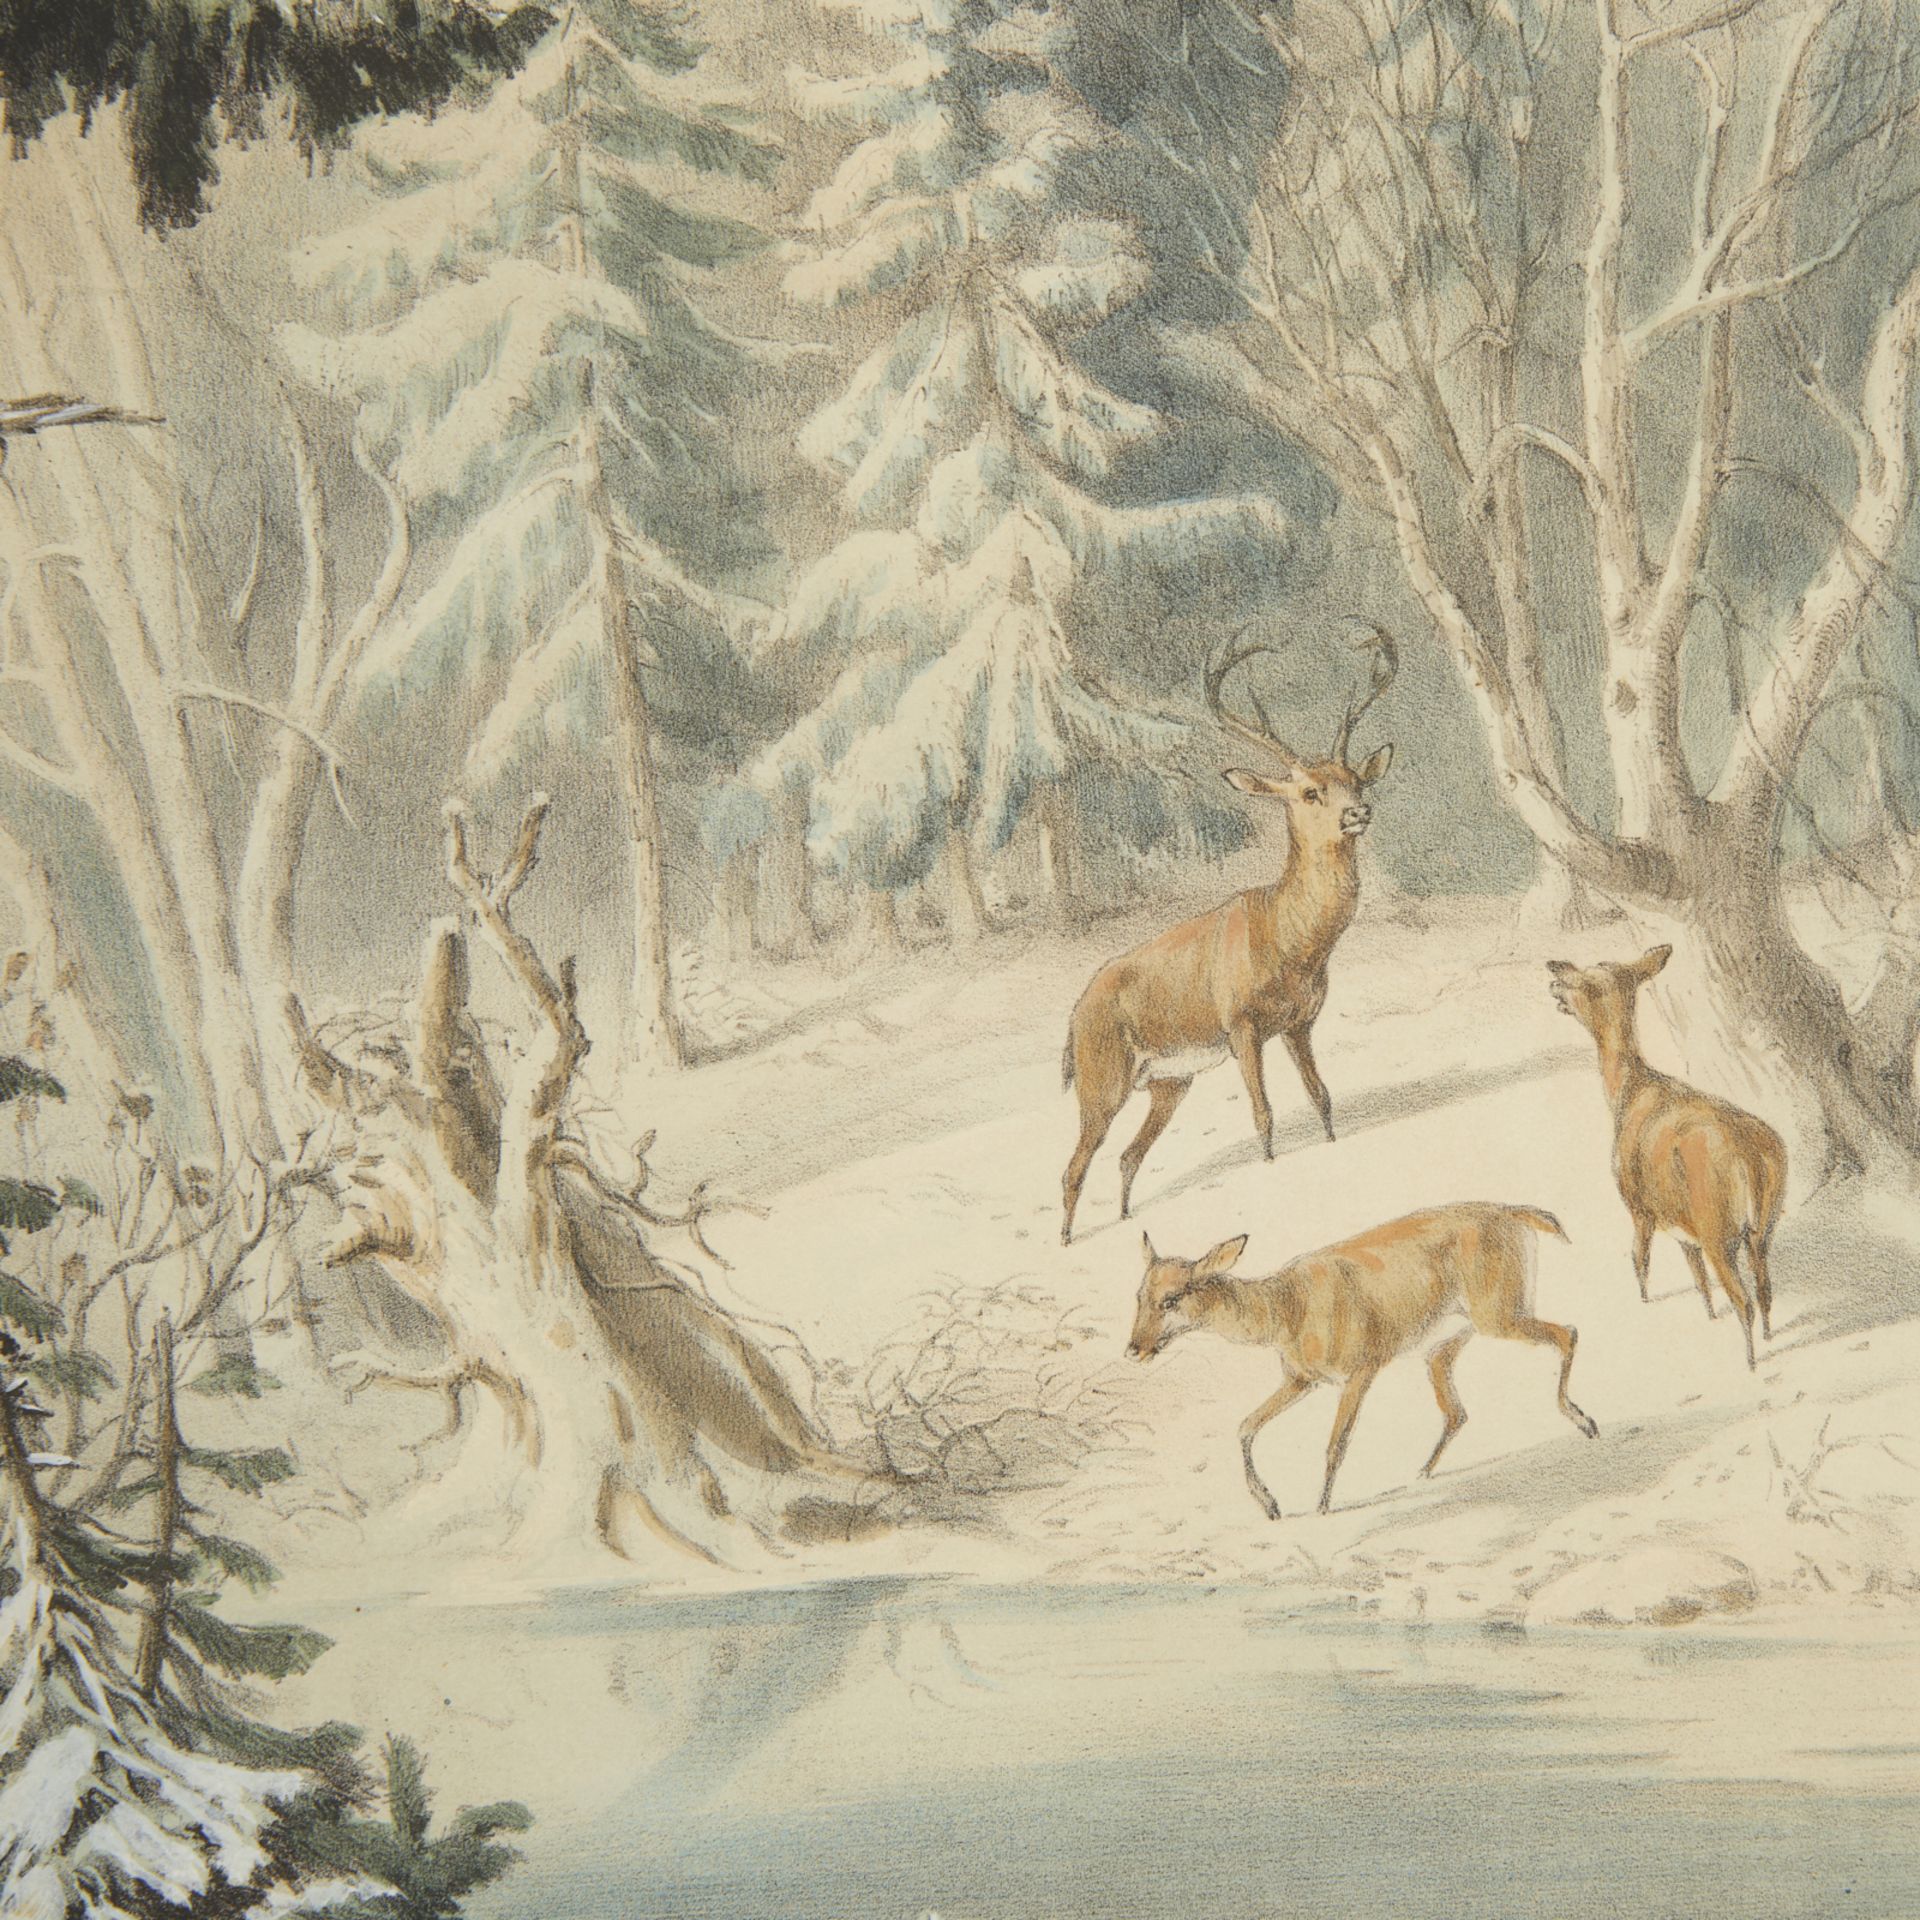 Currier & Ives "Am. Winter Sports: Deer Shooting" - Image 7 of 8